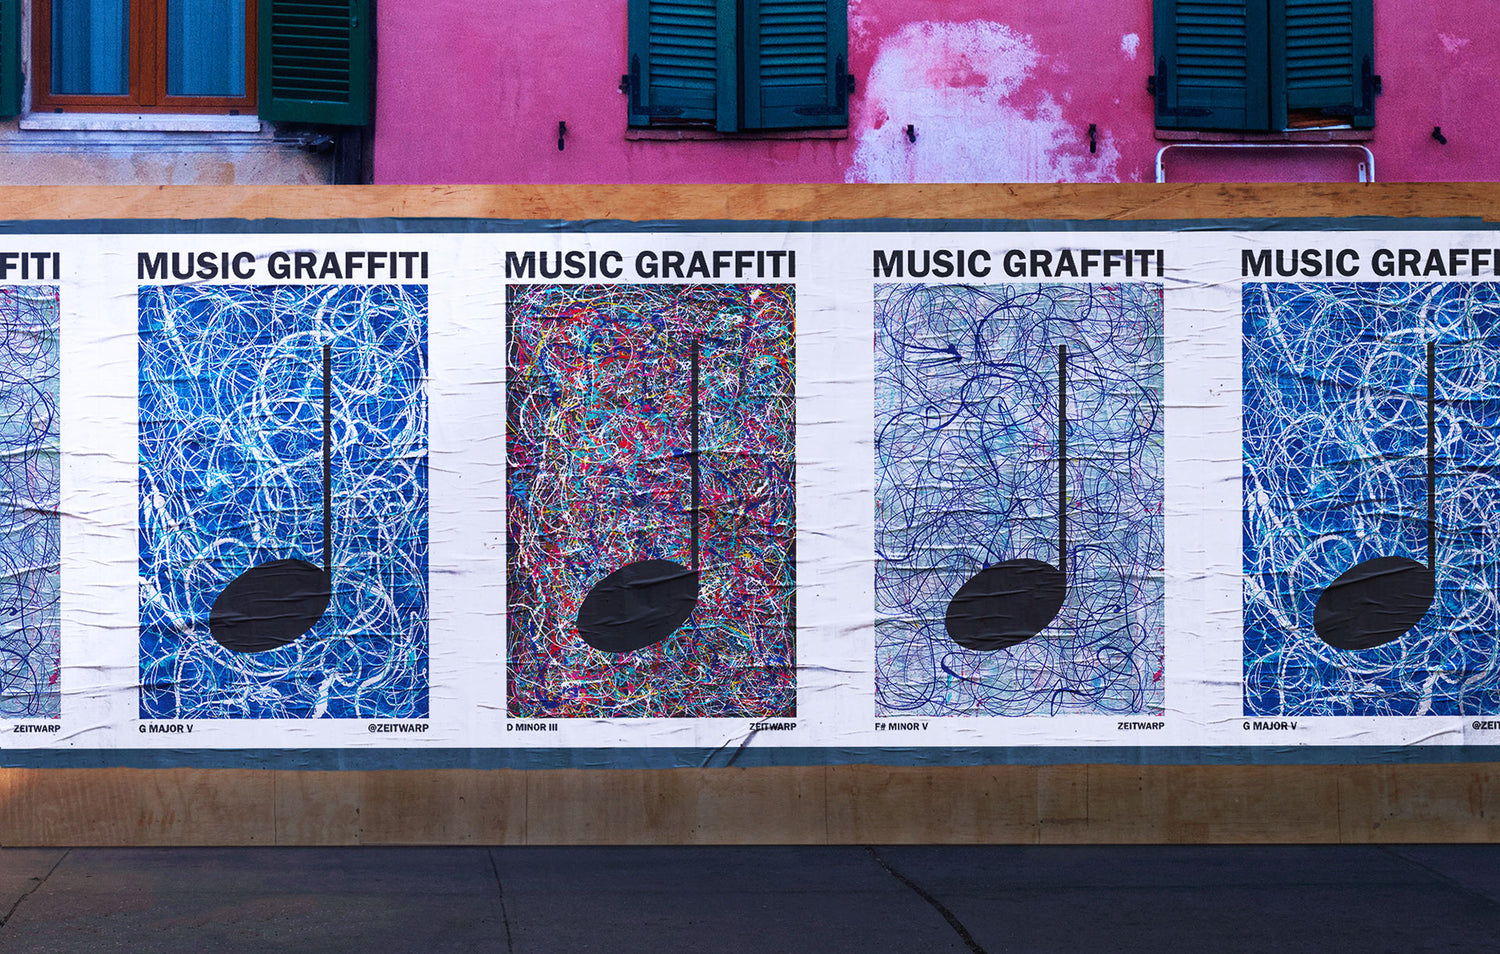 Glued posters on a brick wall showing Music Graffiti images